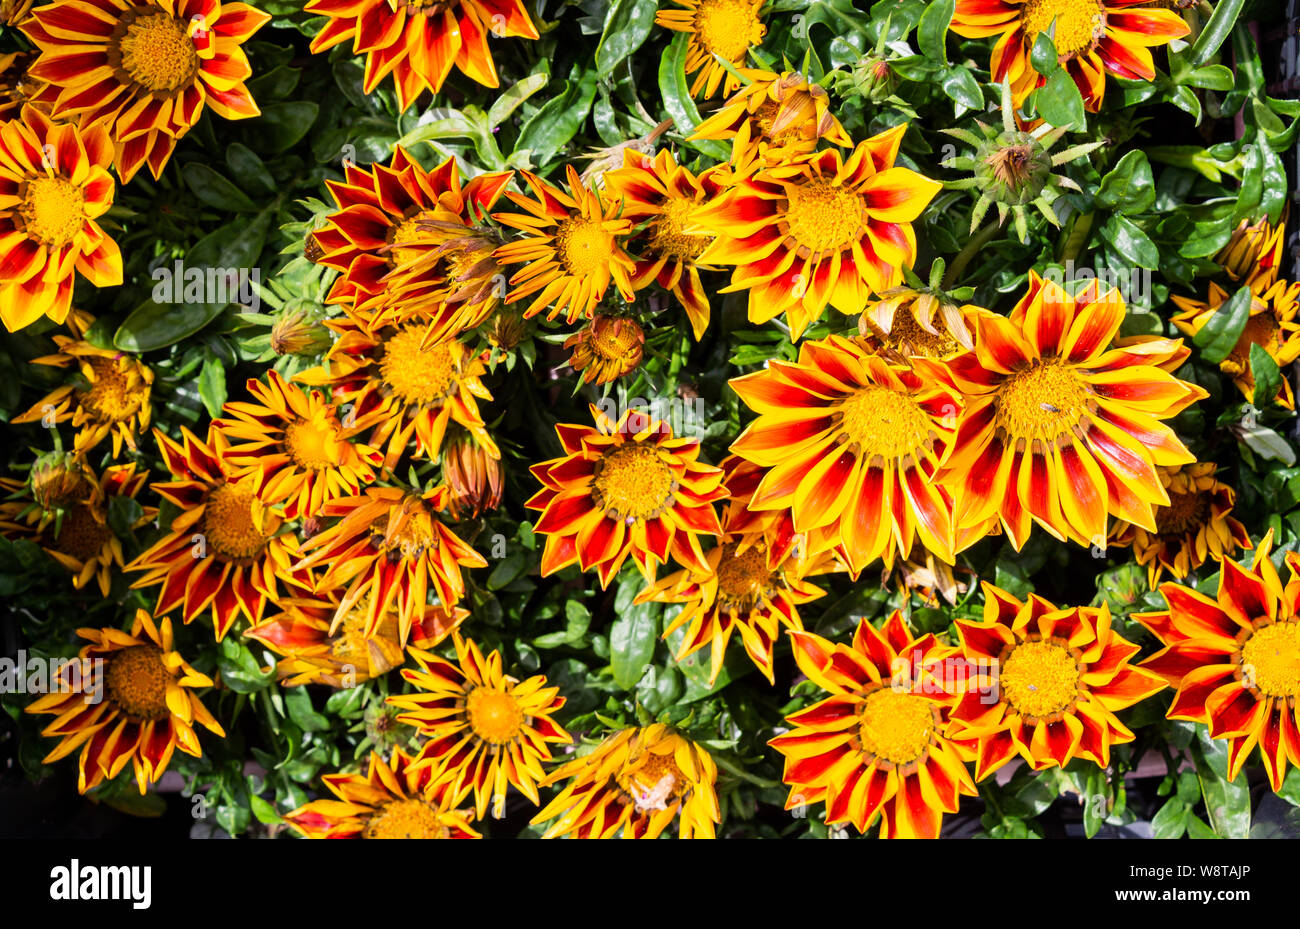 Red and yellow Gazania flowers in full bloom Stock Photo